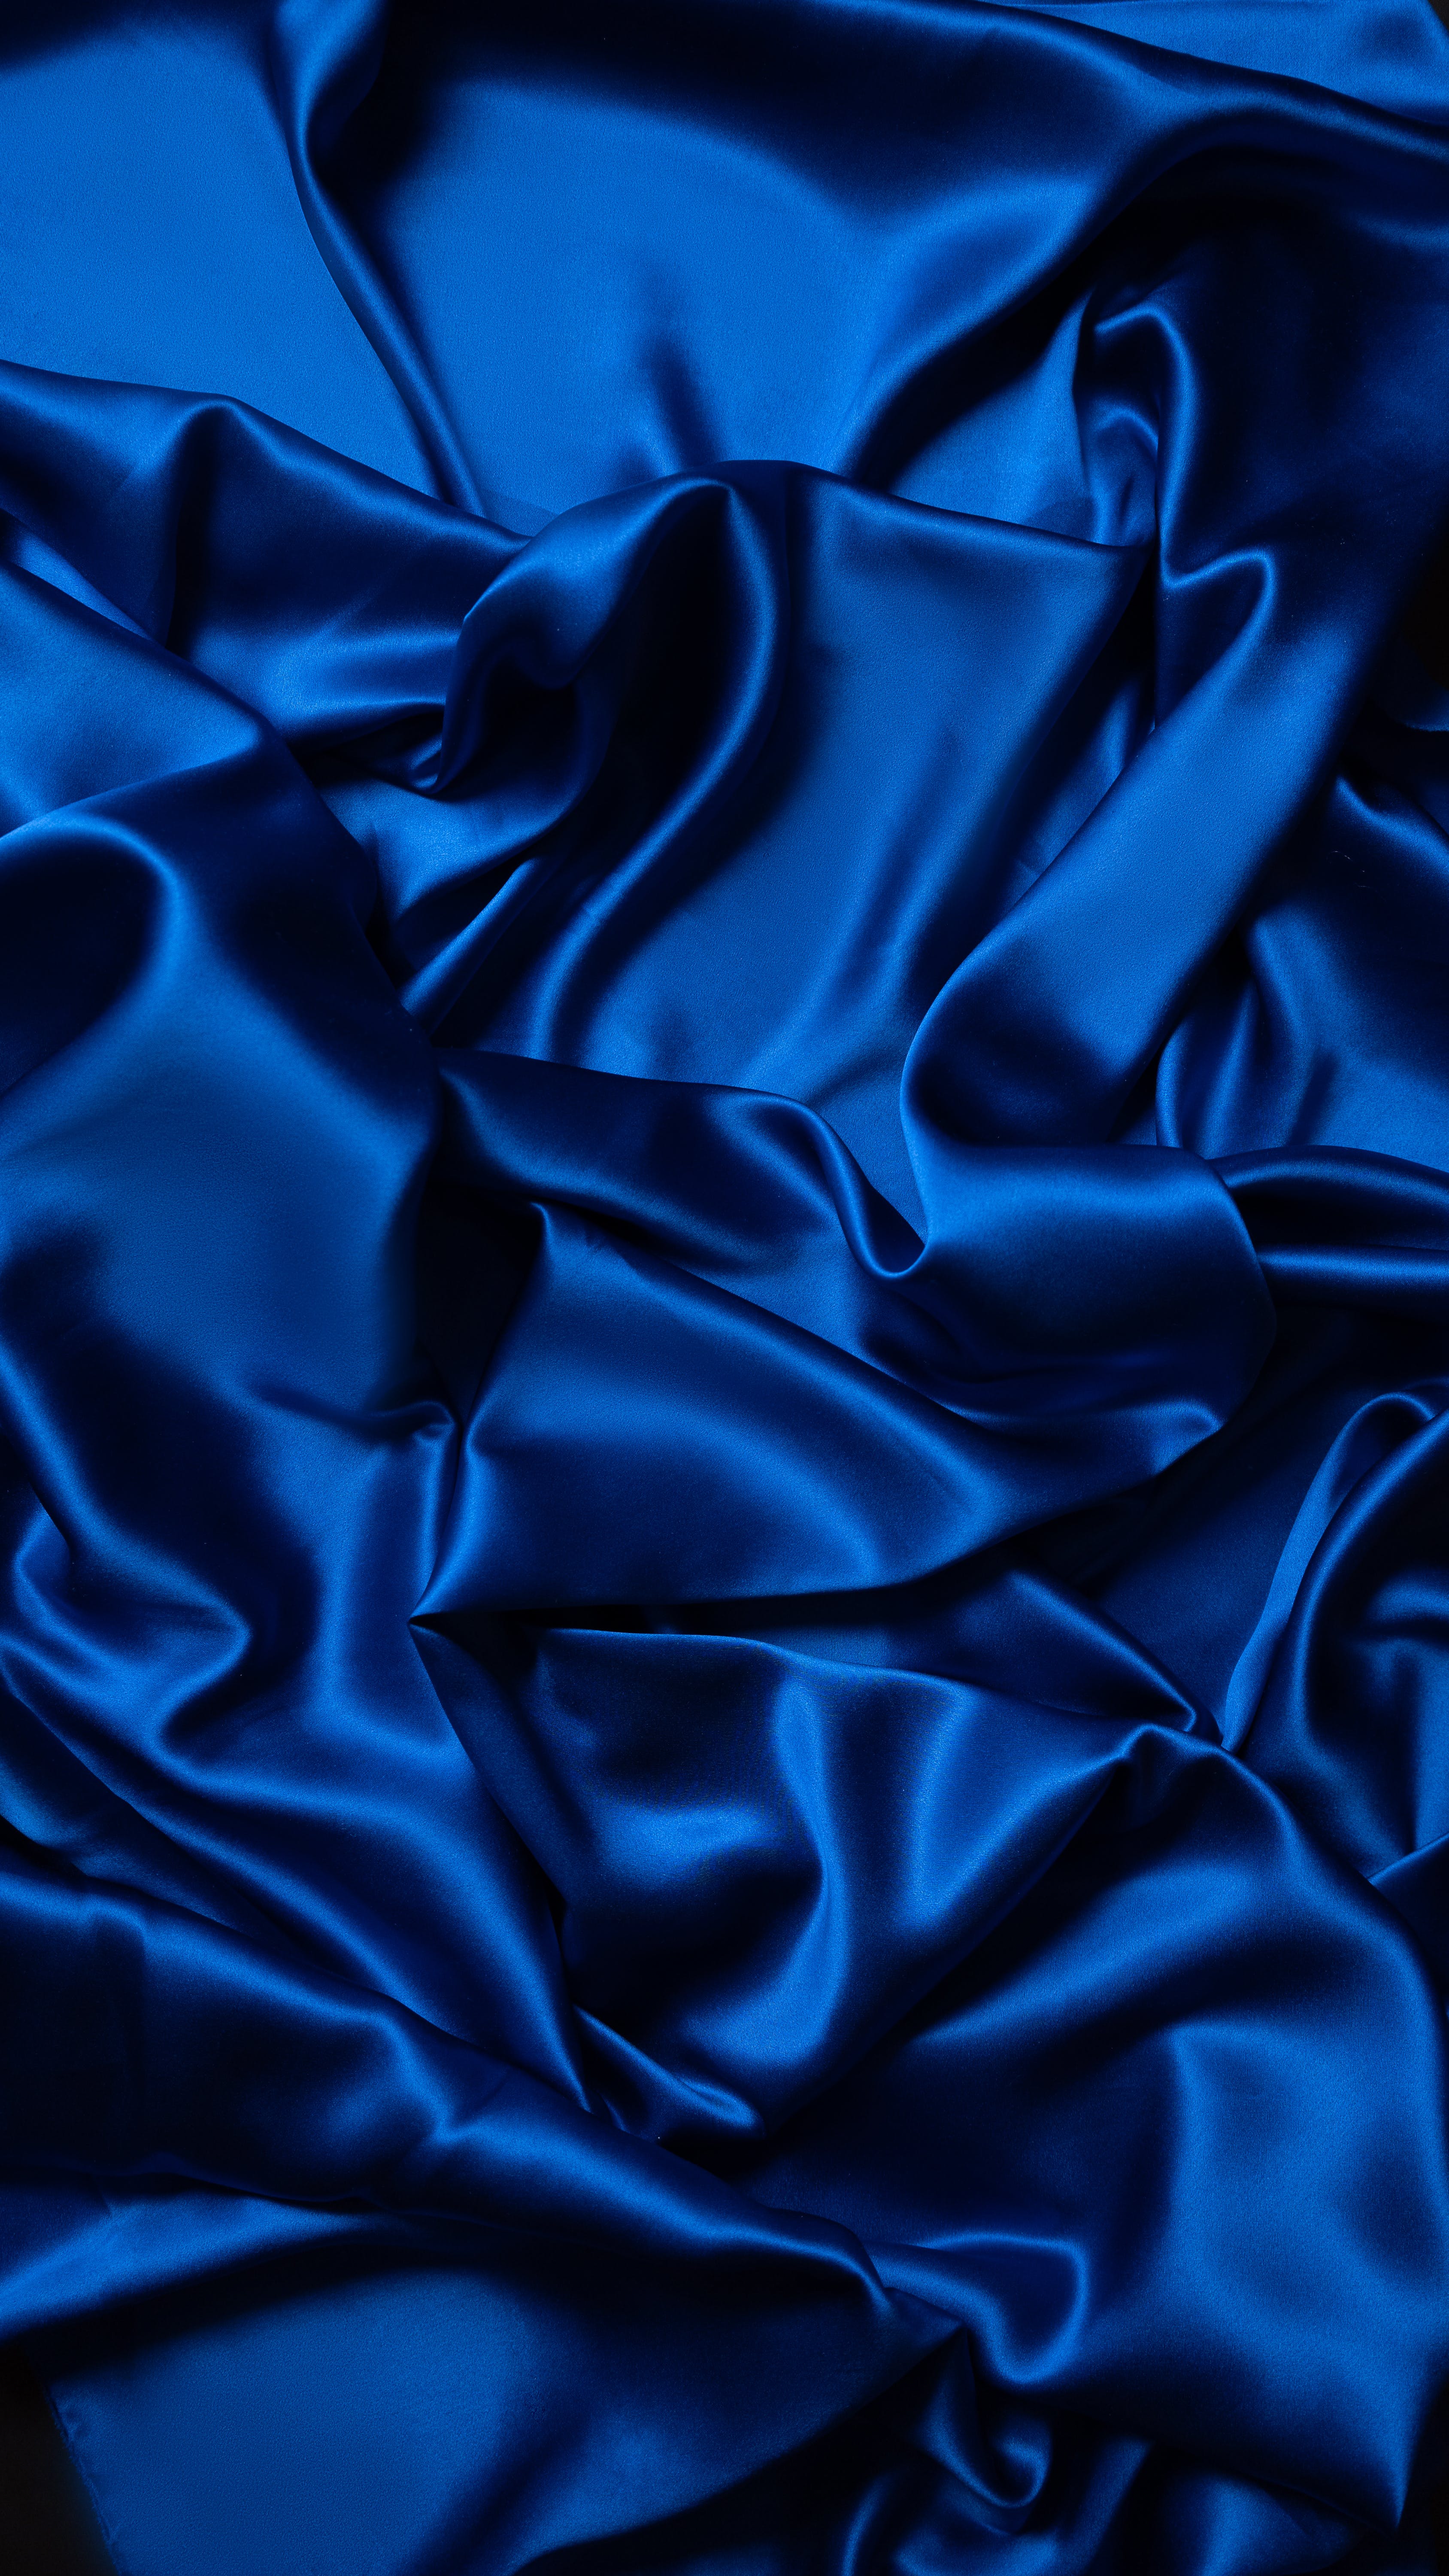 A Blue Silk Fabric Surface · Free Stock